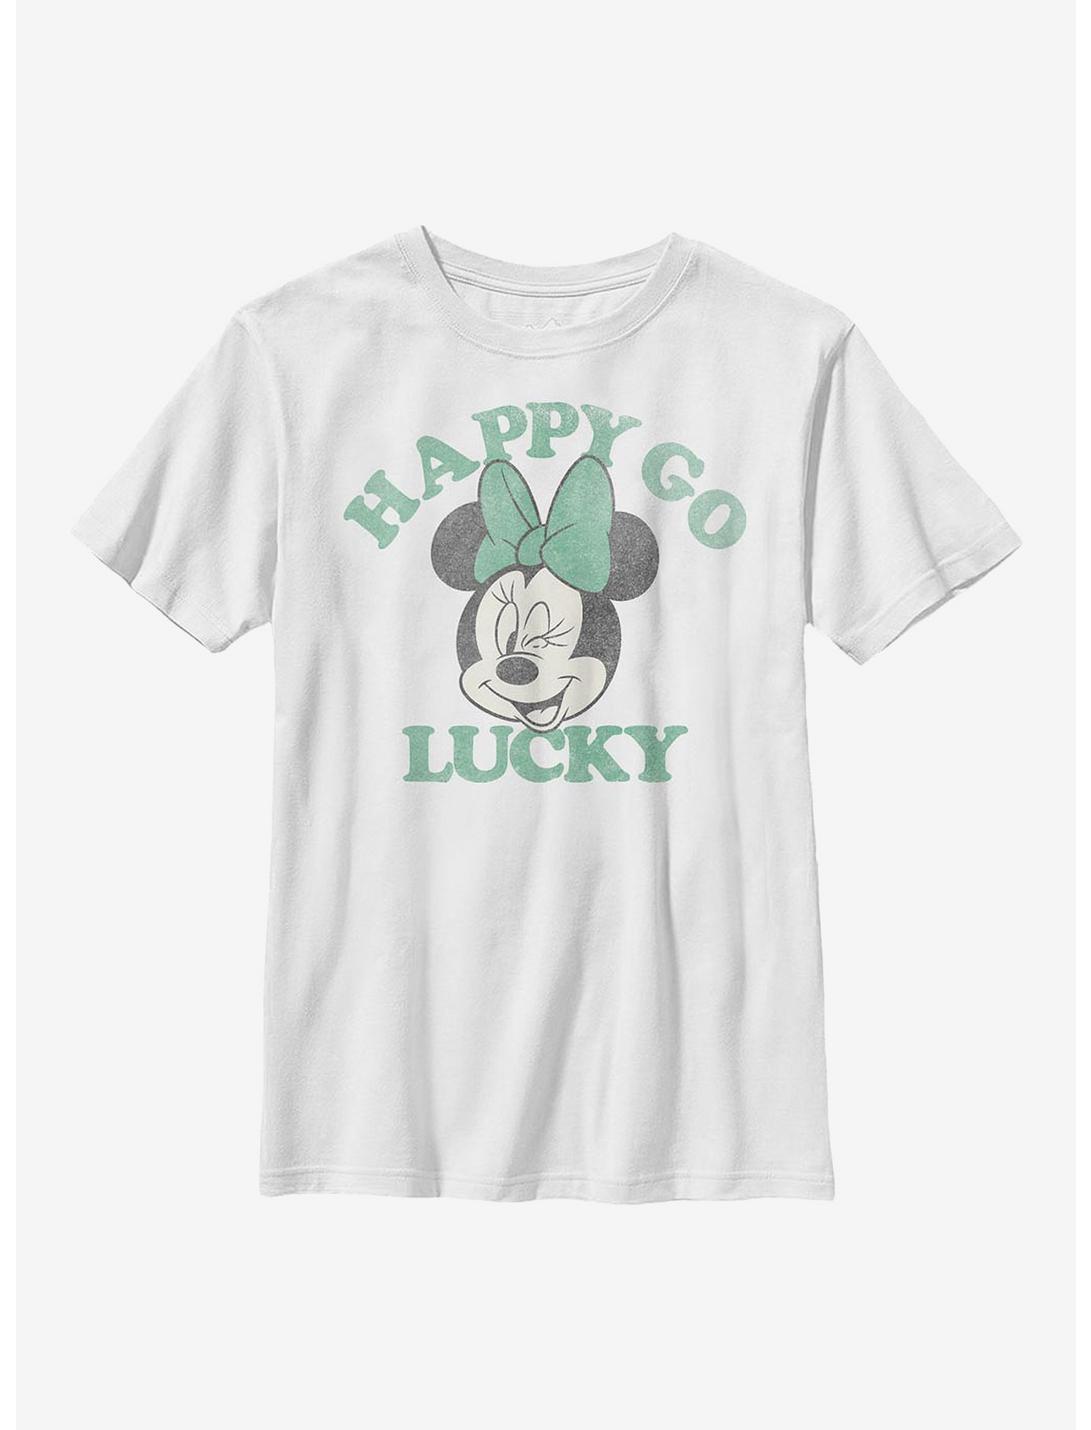 Plus Size Disney Minnie Mouse Lucky Minnie Youth T-Shirt, WHITE, hi-res